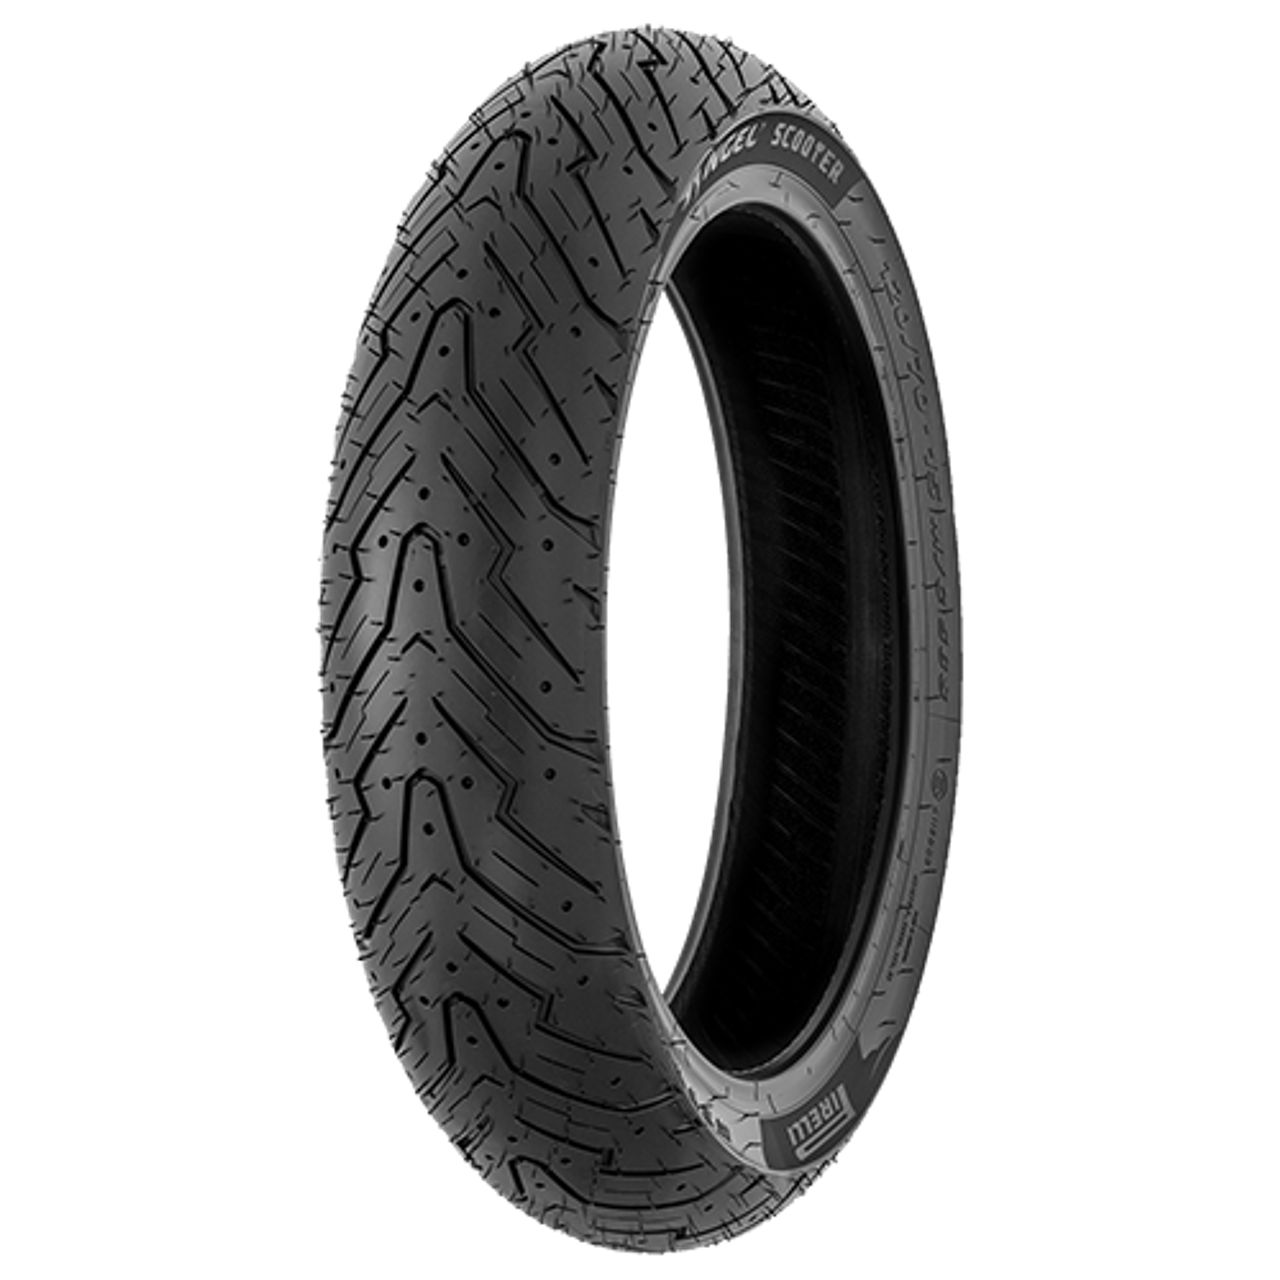 PIRELLI ANGEL SCOOTER 110/90 - 13 M/C TL 56P FRONT